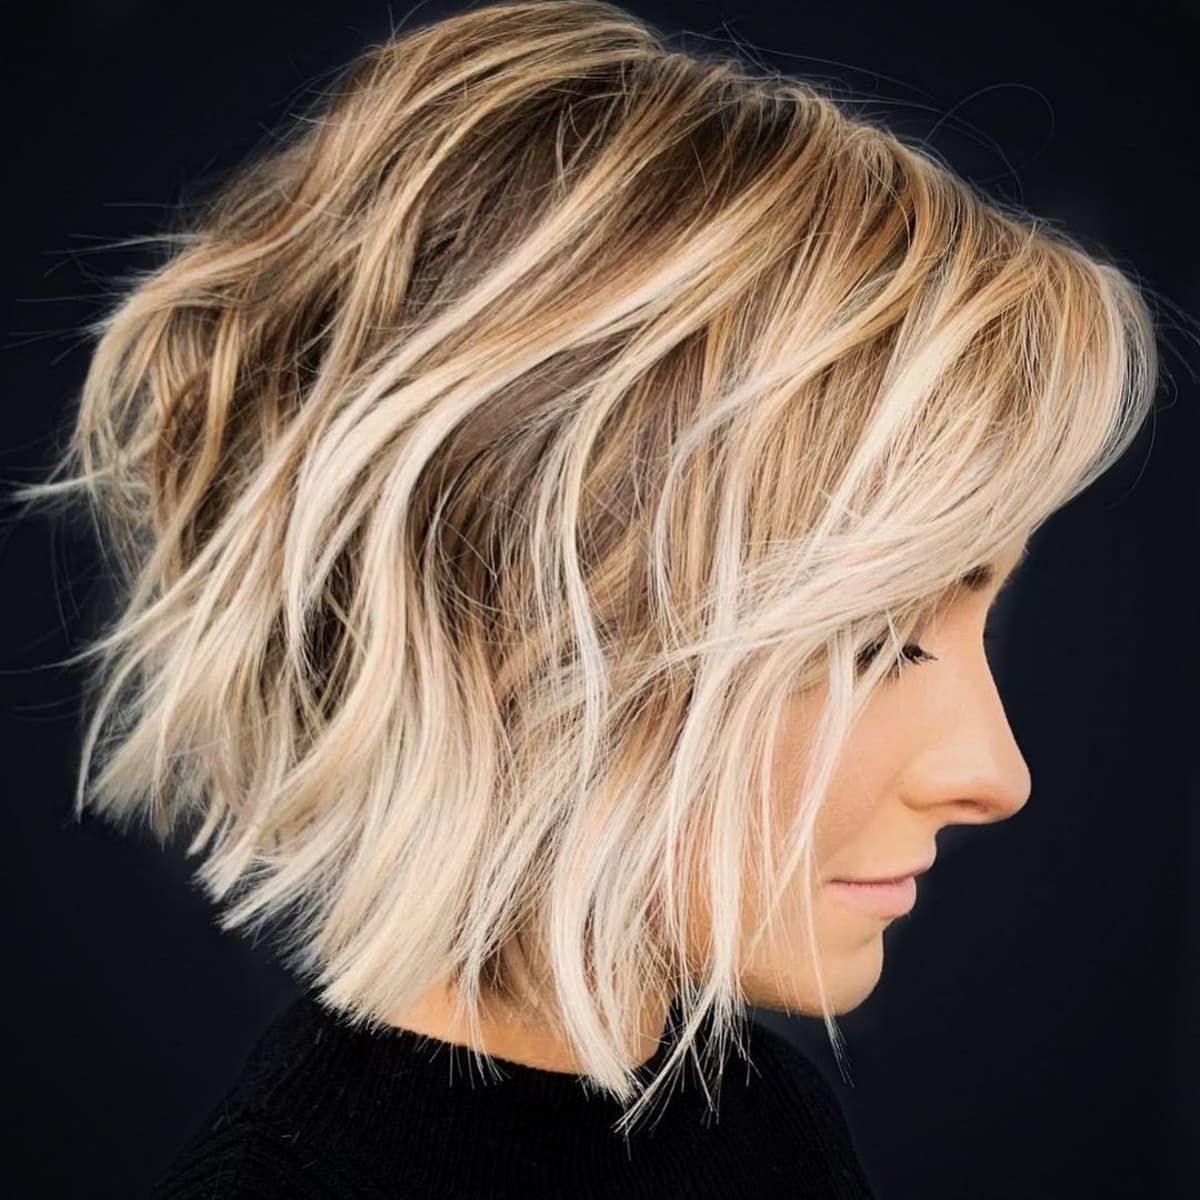 46 Most Popular Short Wavy Hair Styles & Haircuts Right Now Pertaining To Short Hairstyles With Loose Curls (View 9 of 25)